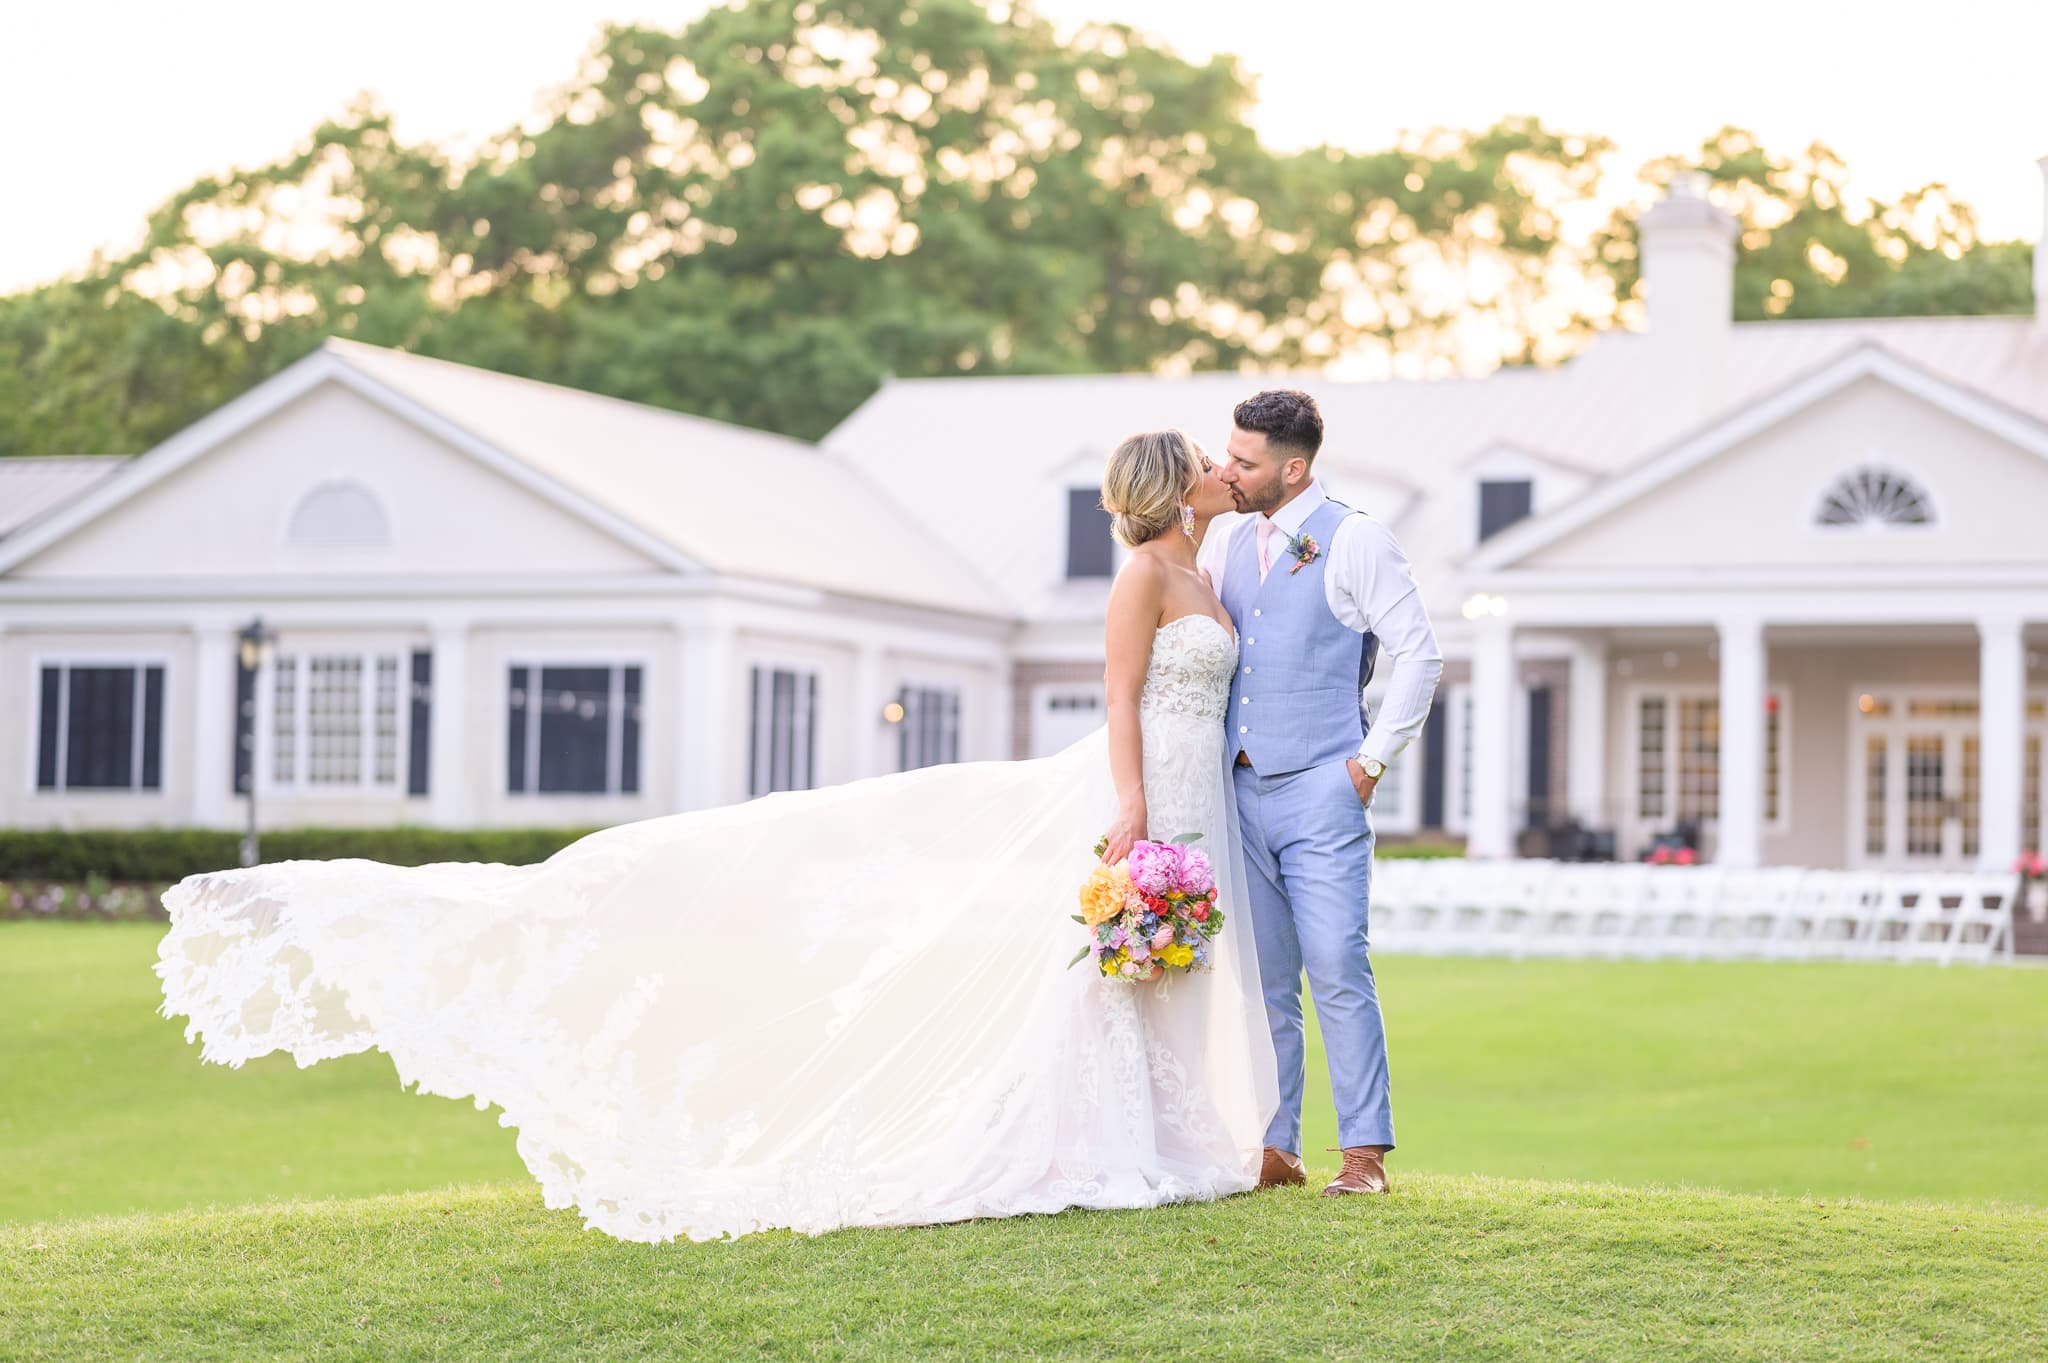 Bride's dress flowing in the wind - Pawleys Plantation Golf & Country Club